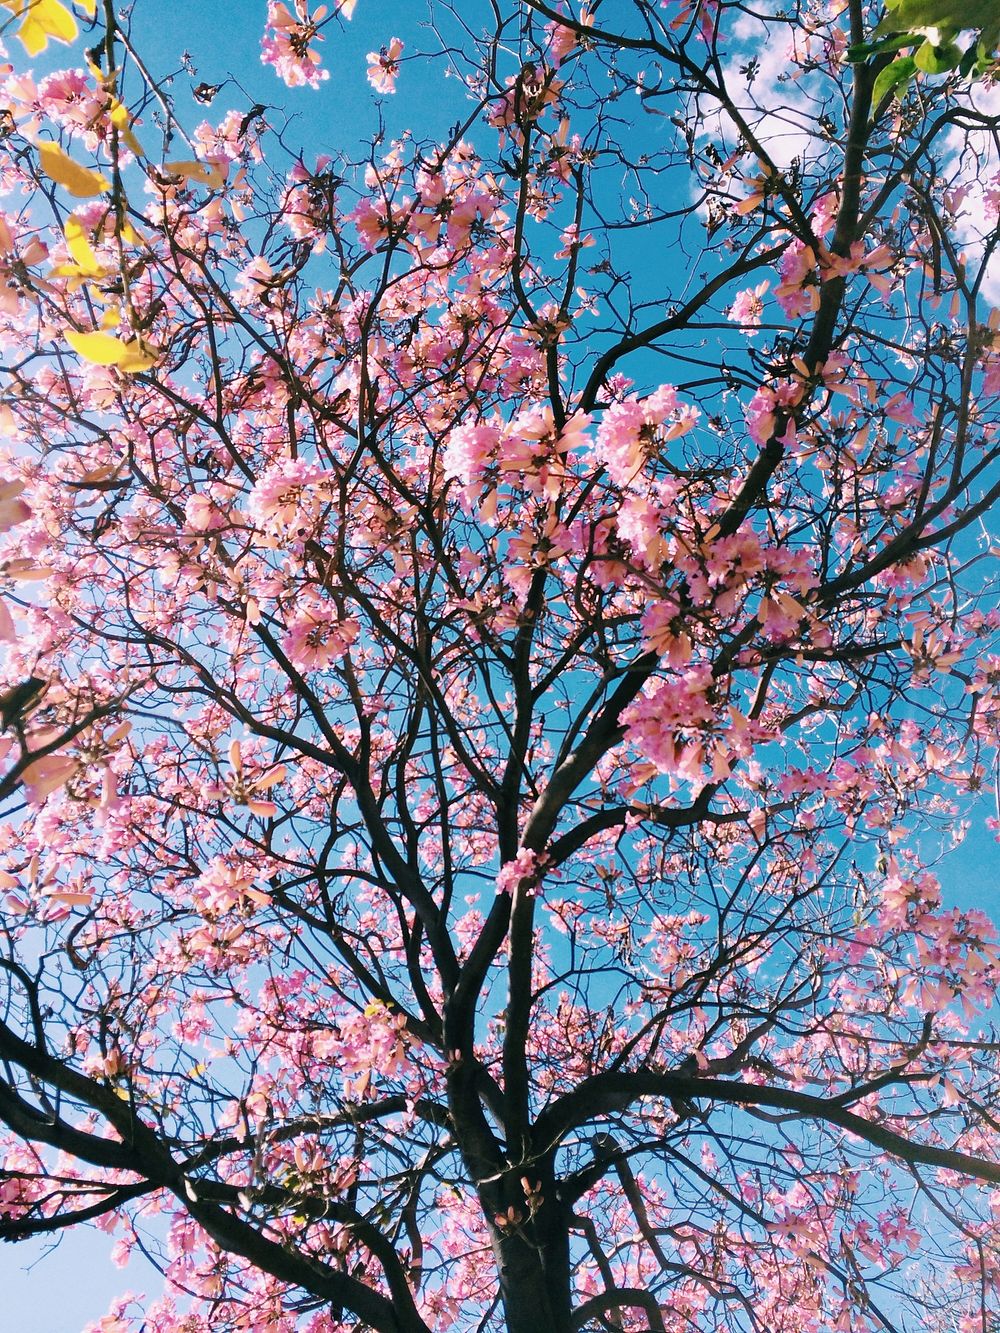 A low-angle shot of pink-flowered cherry blossom tree. Original public domain image from Wikimedia Commons